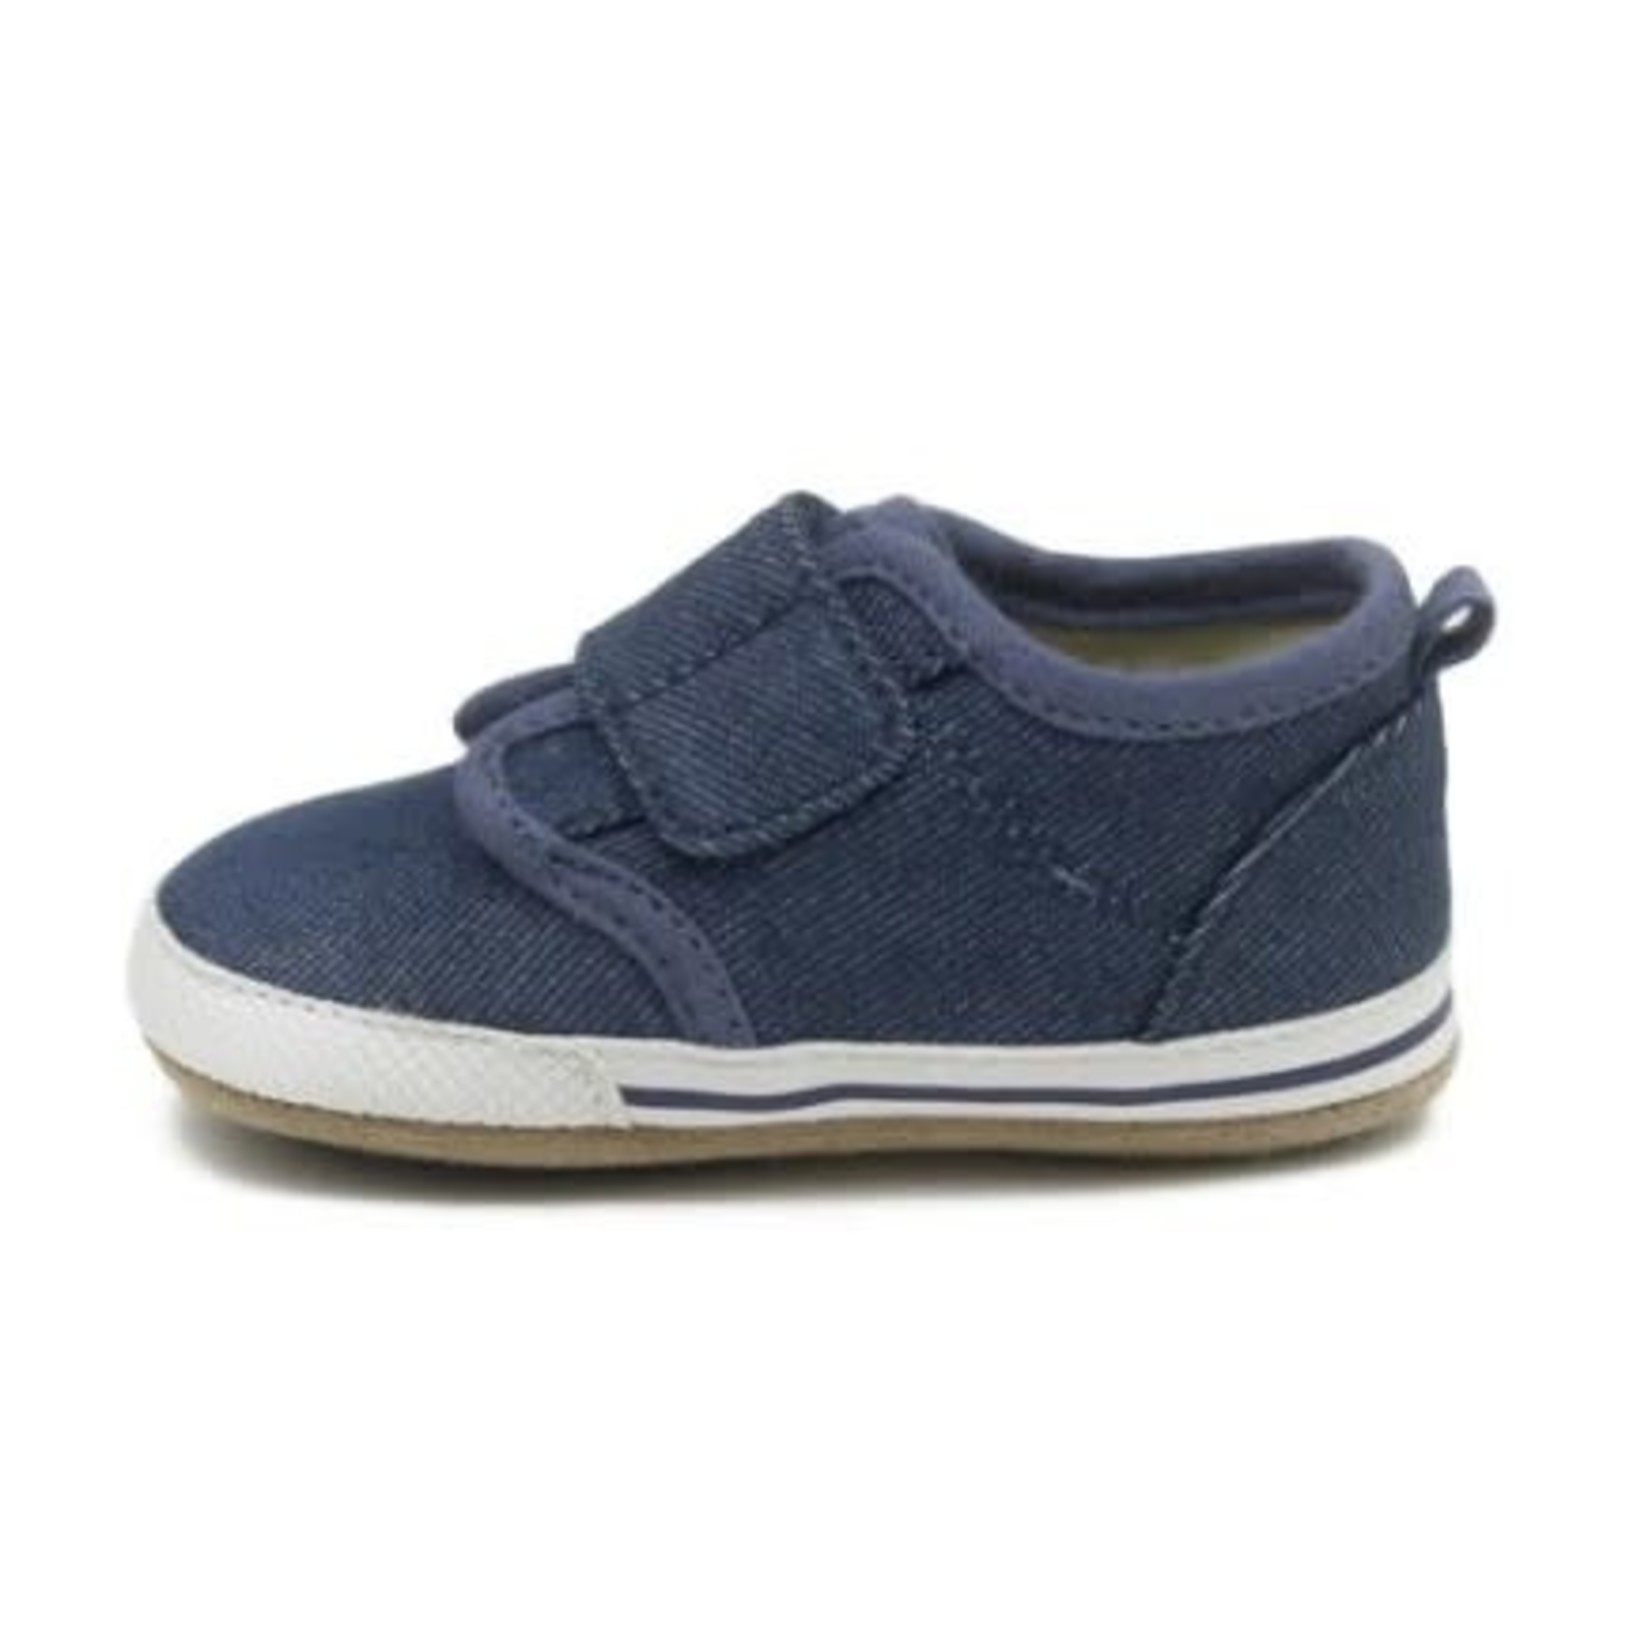 Robeez ROBEEZ - Transition shoes 'First Kicks - Jerry - Navy'